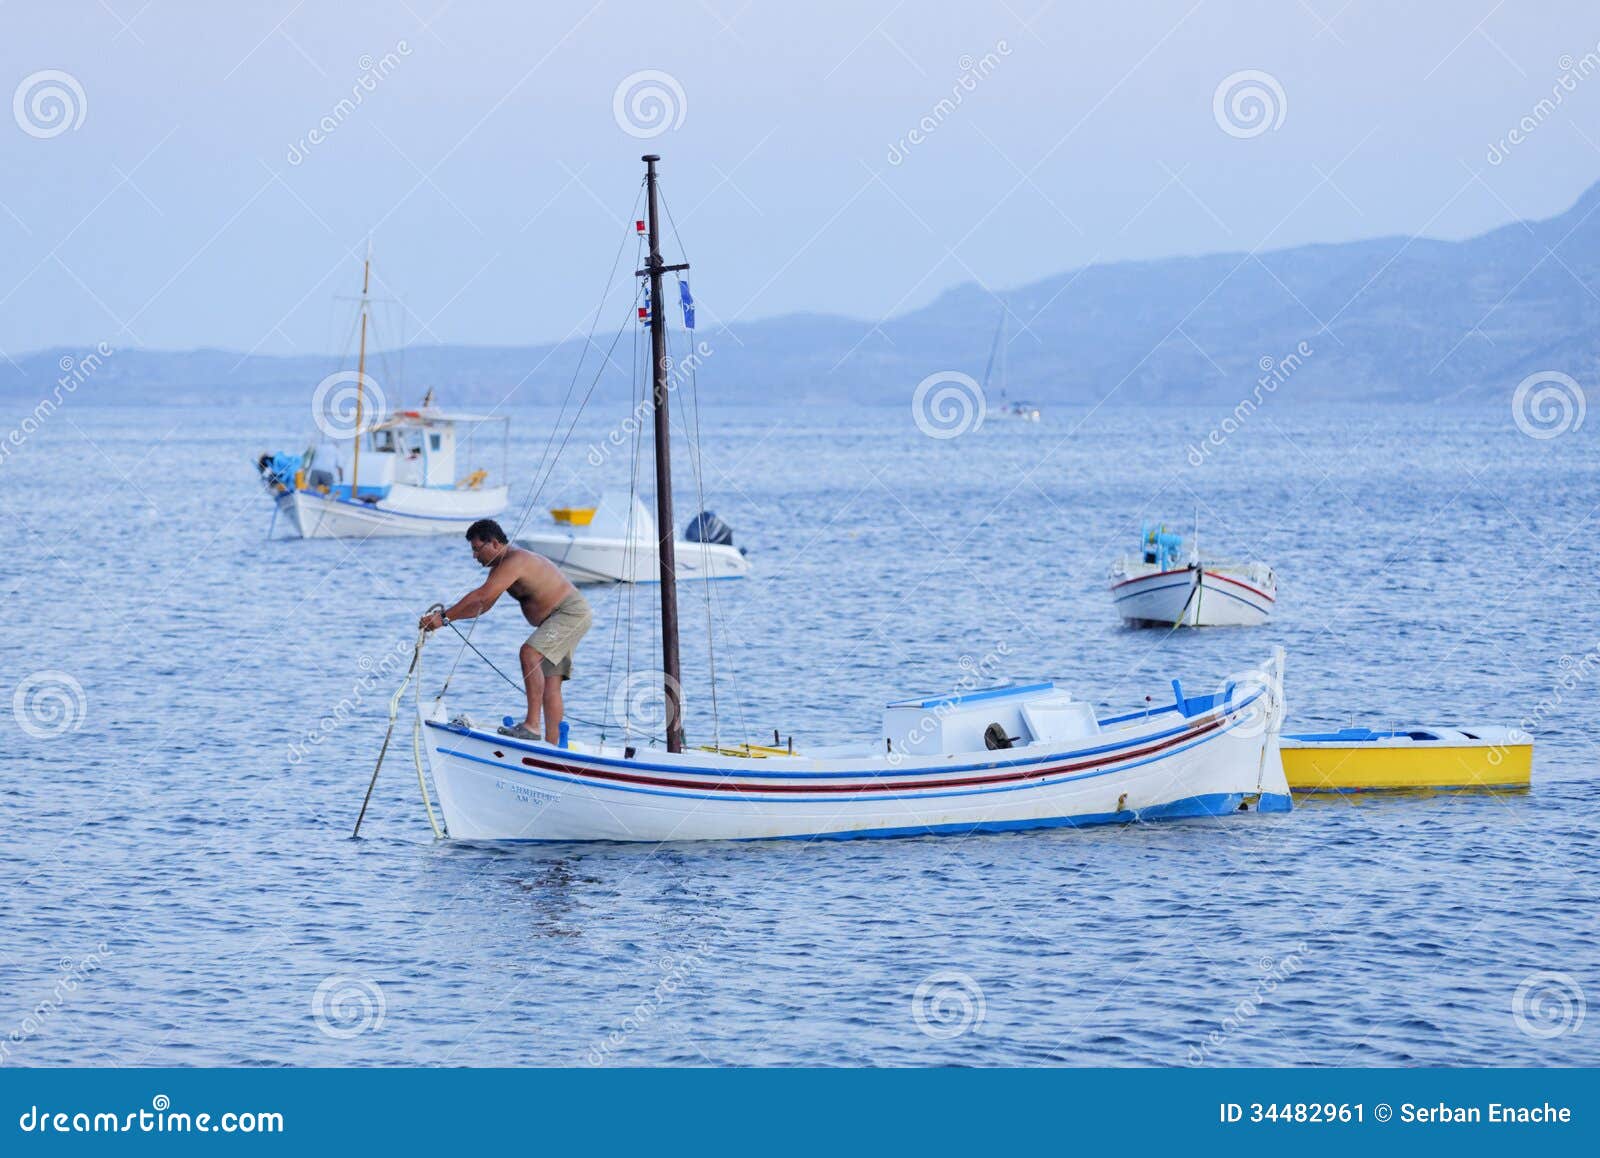  deck of his fishing boat. Photographed in Klima, Milos island, Greece